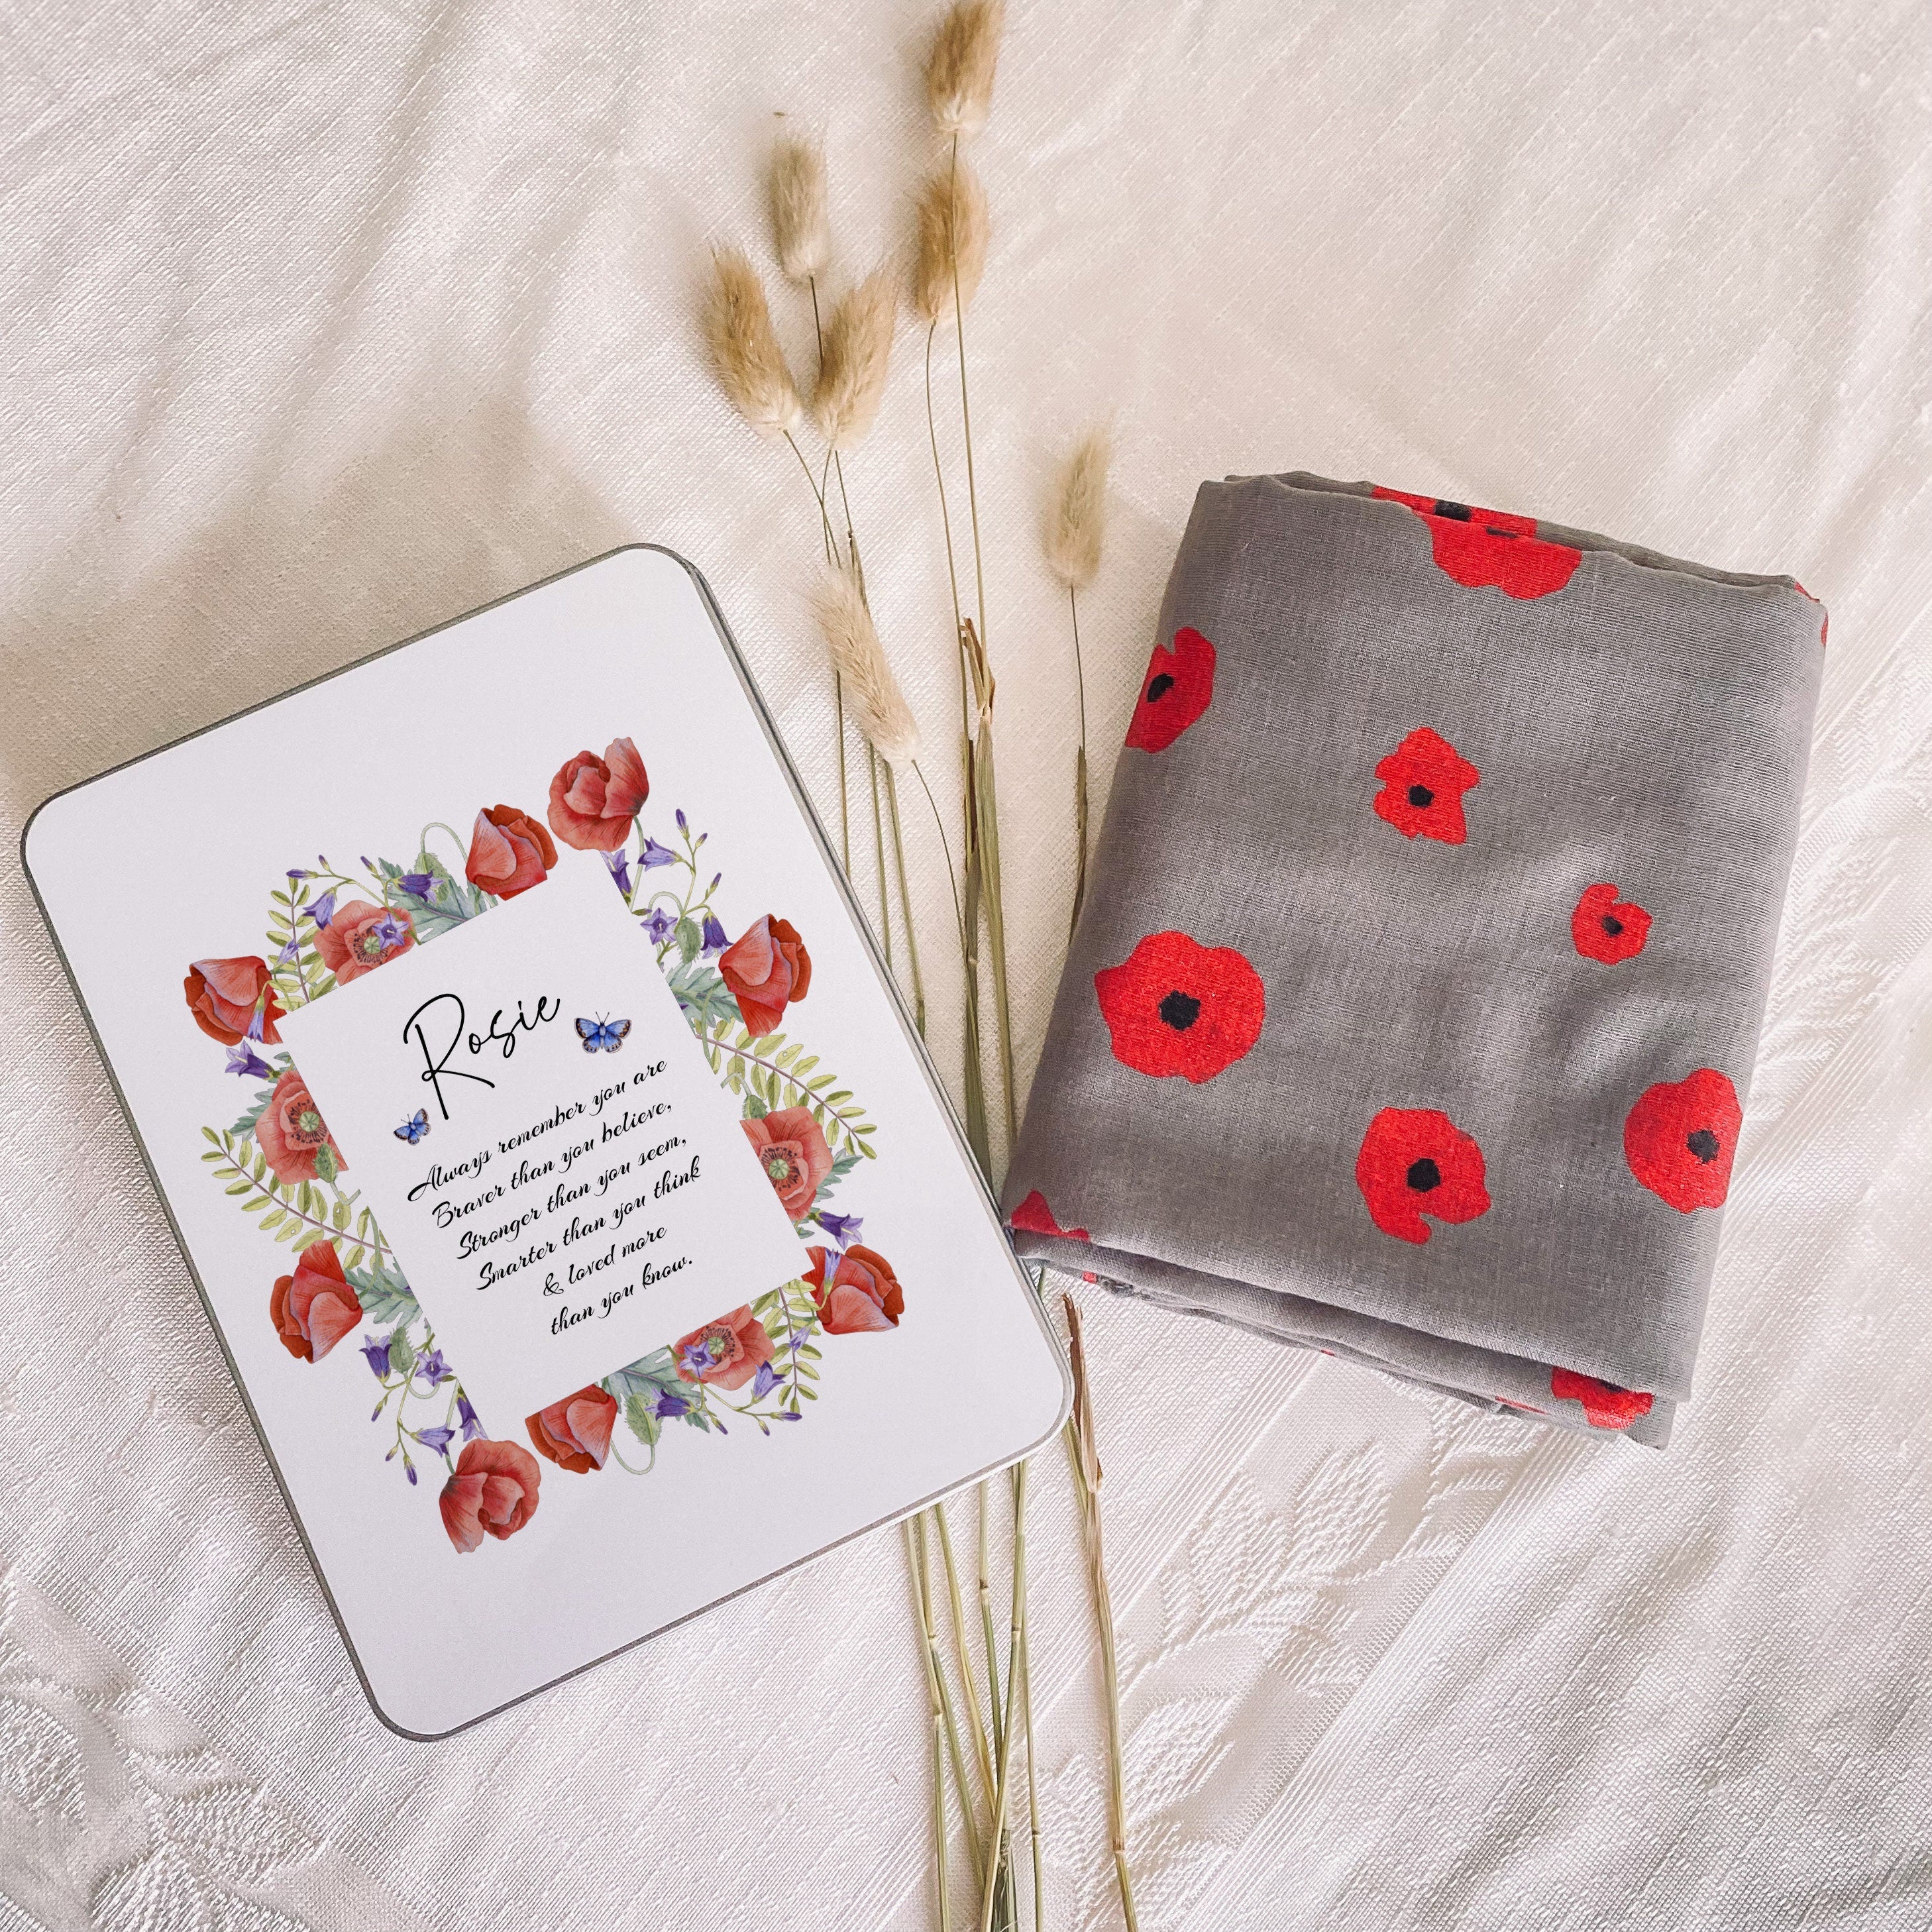 Poppy Cotton Scarf In A Personalised Metal Gift Box, Gift For Her, Inspirational Gift